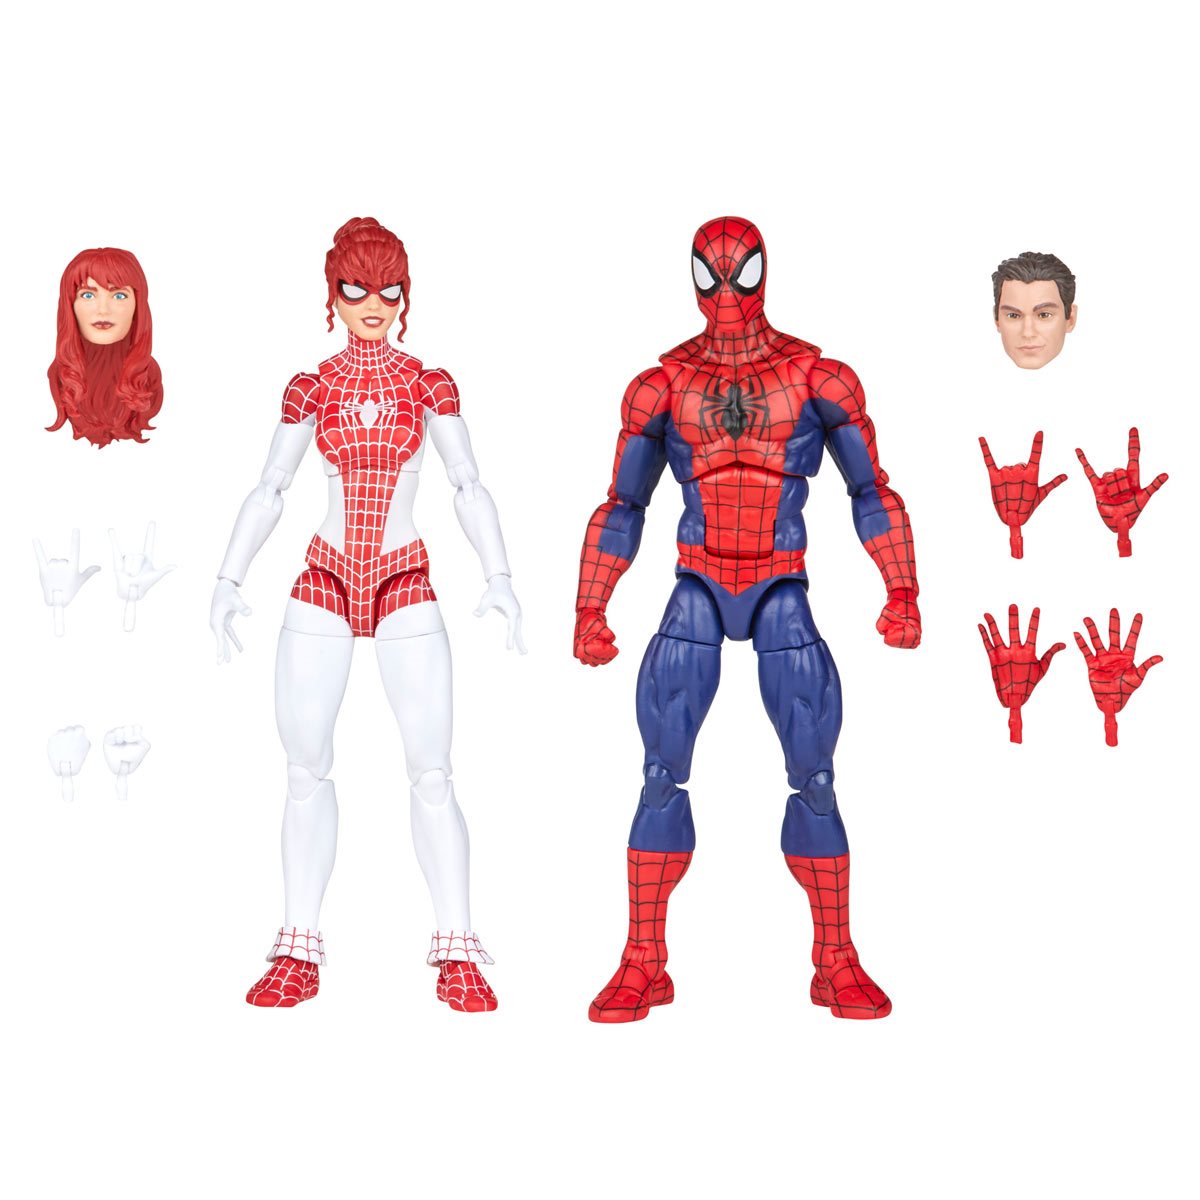 Spider-Man and Spinneret Set - The Amazing Spider-Man Hasbro Legends